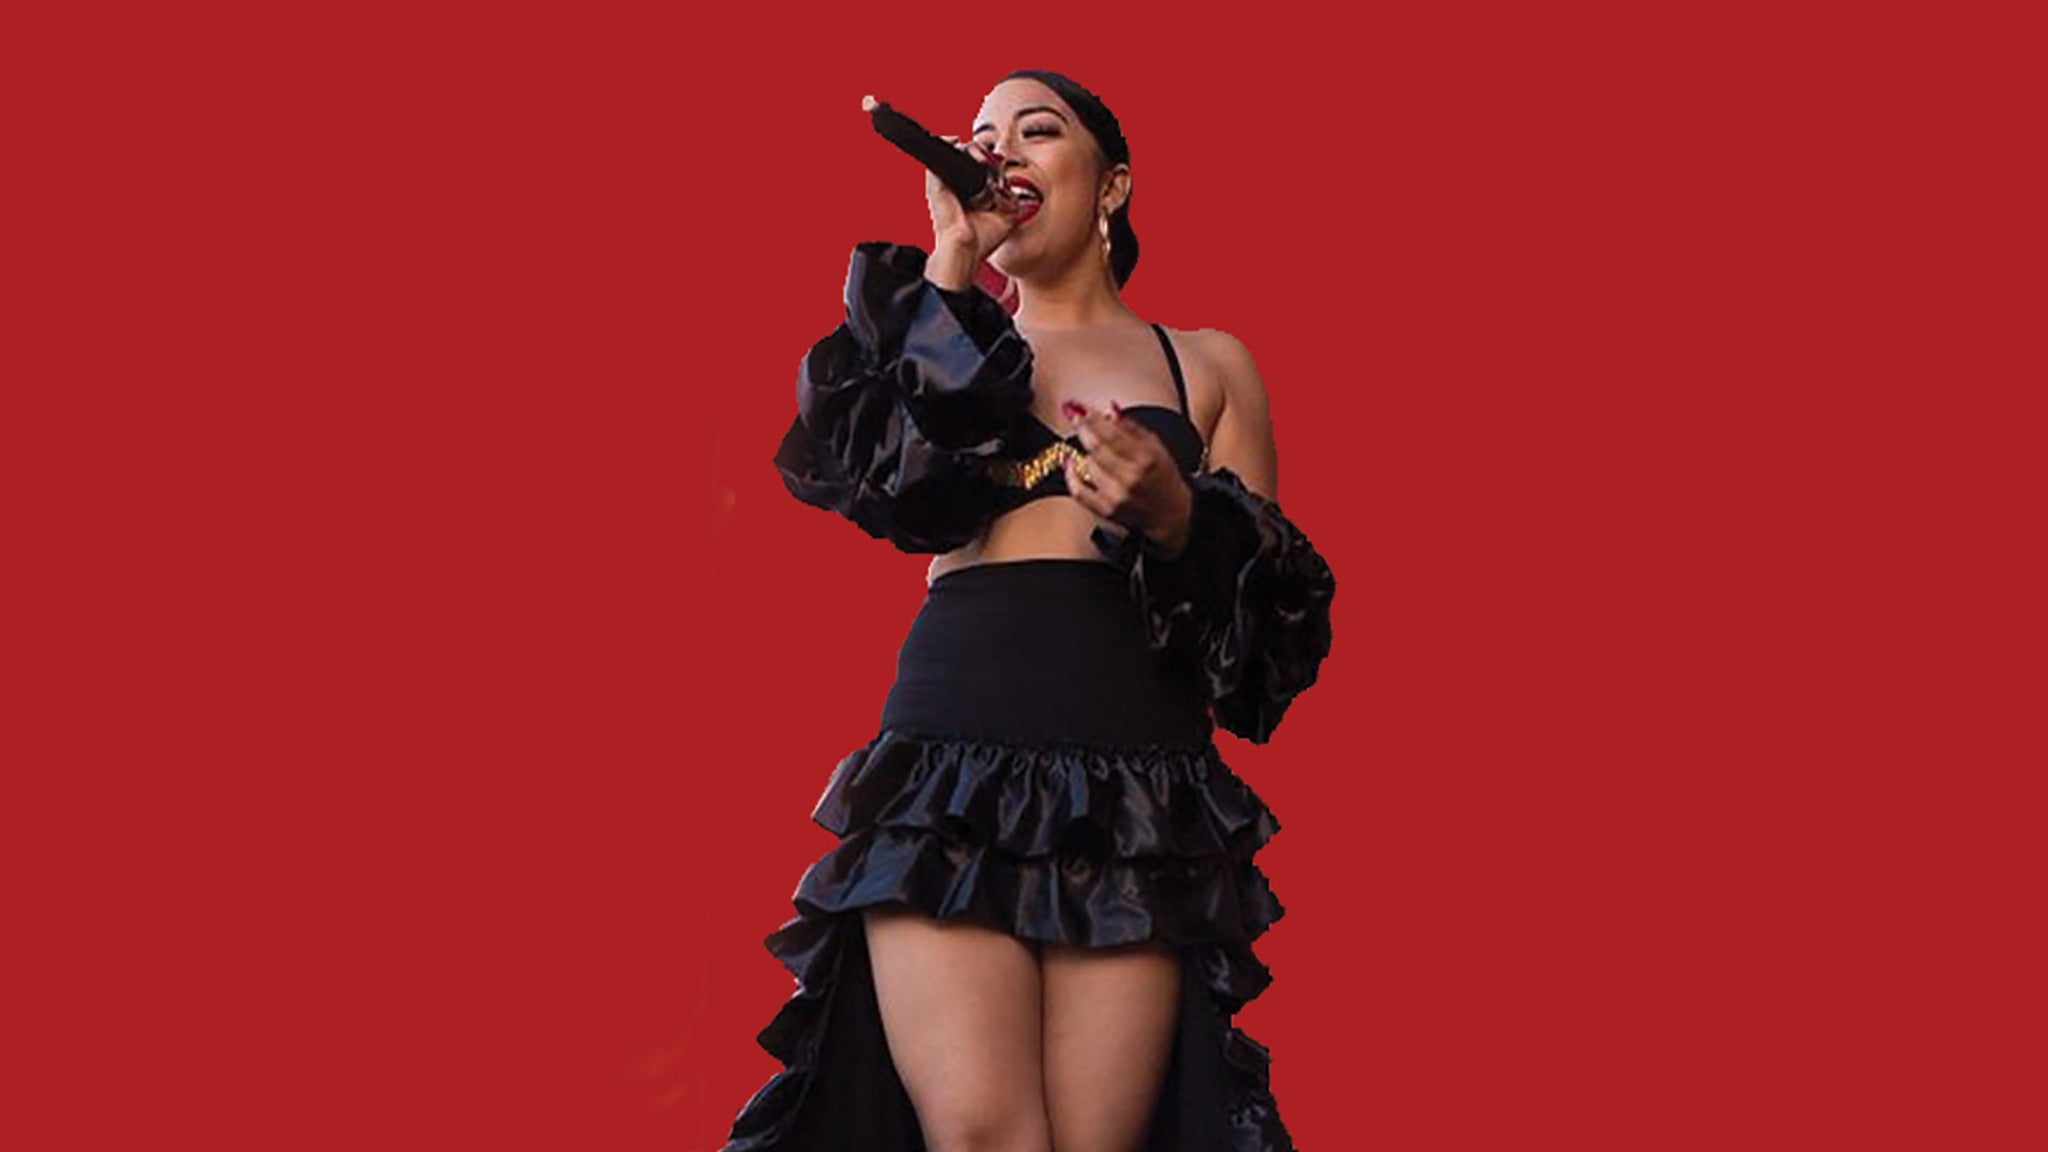 Anything for Selenas! A Selena Tribute Party w/ The Como La Flor Band in Riverside promo photo for LiveNation presale offer code